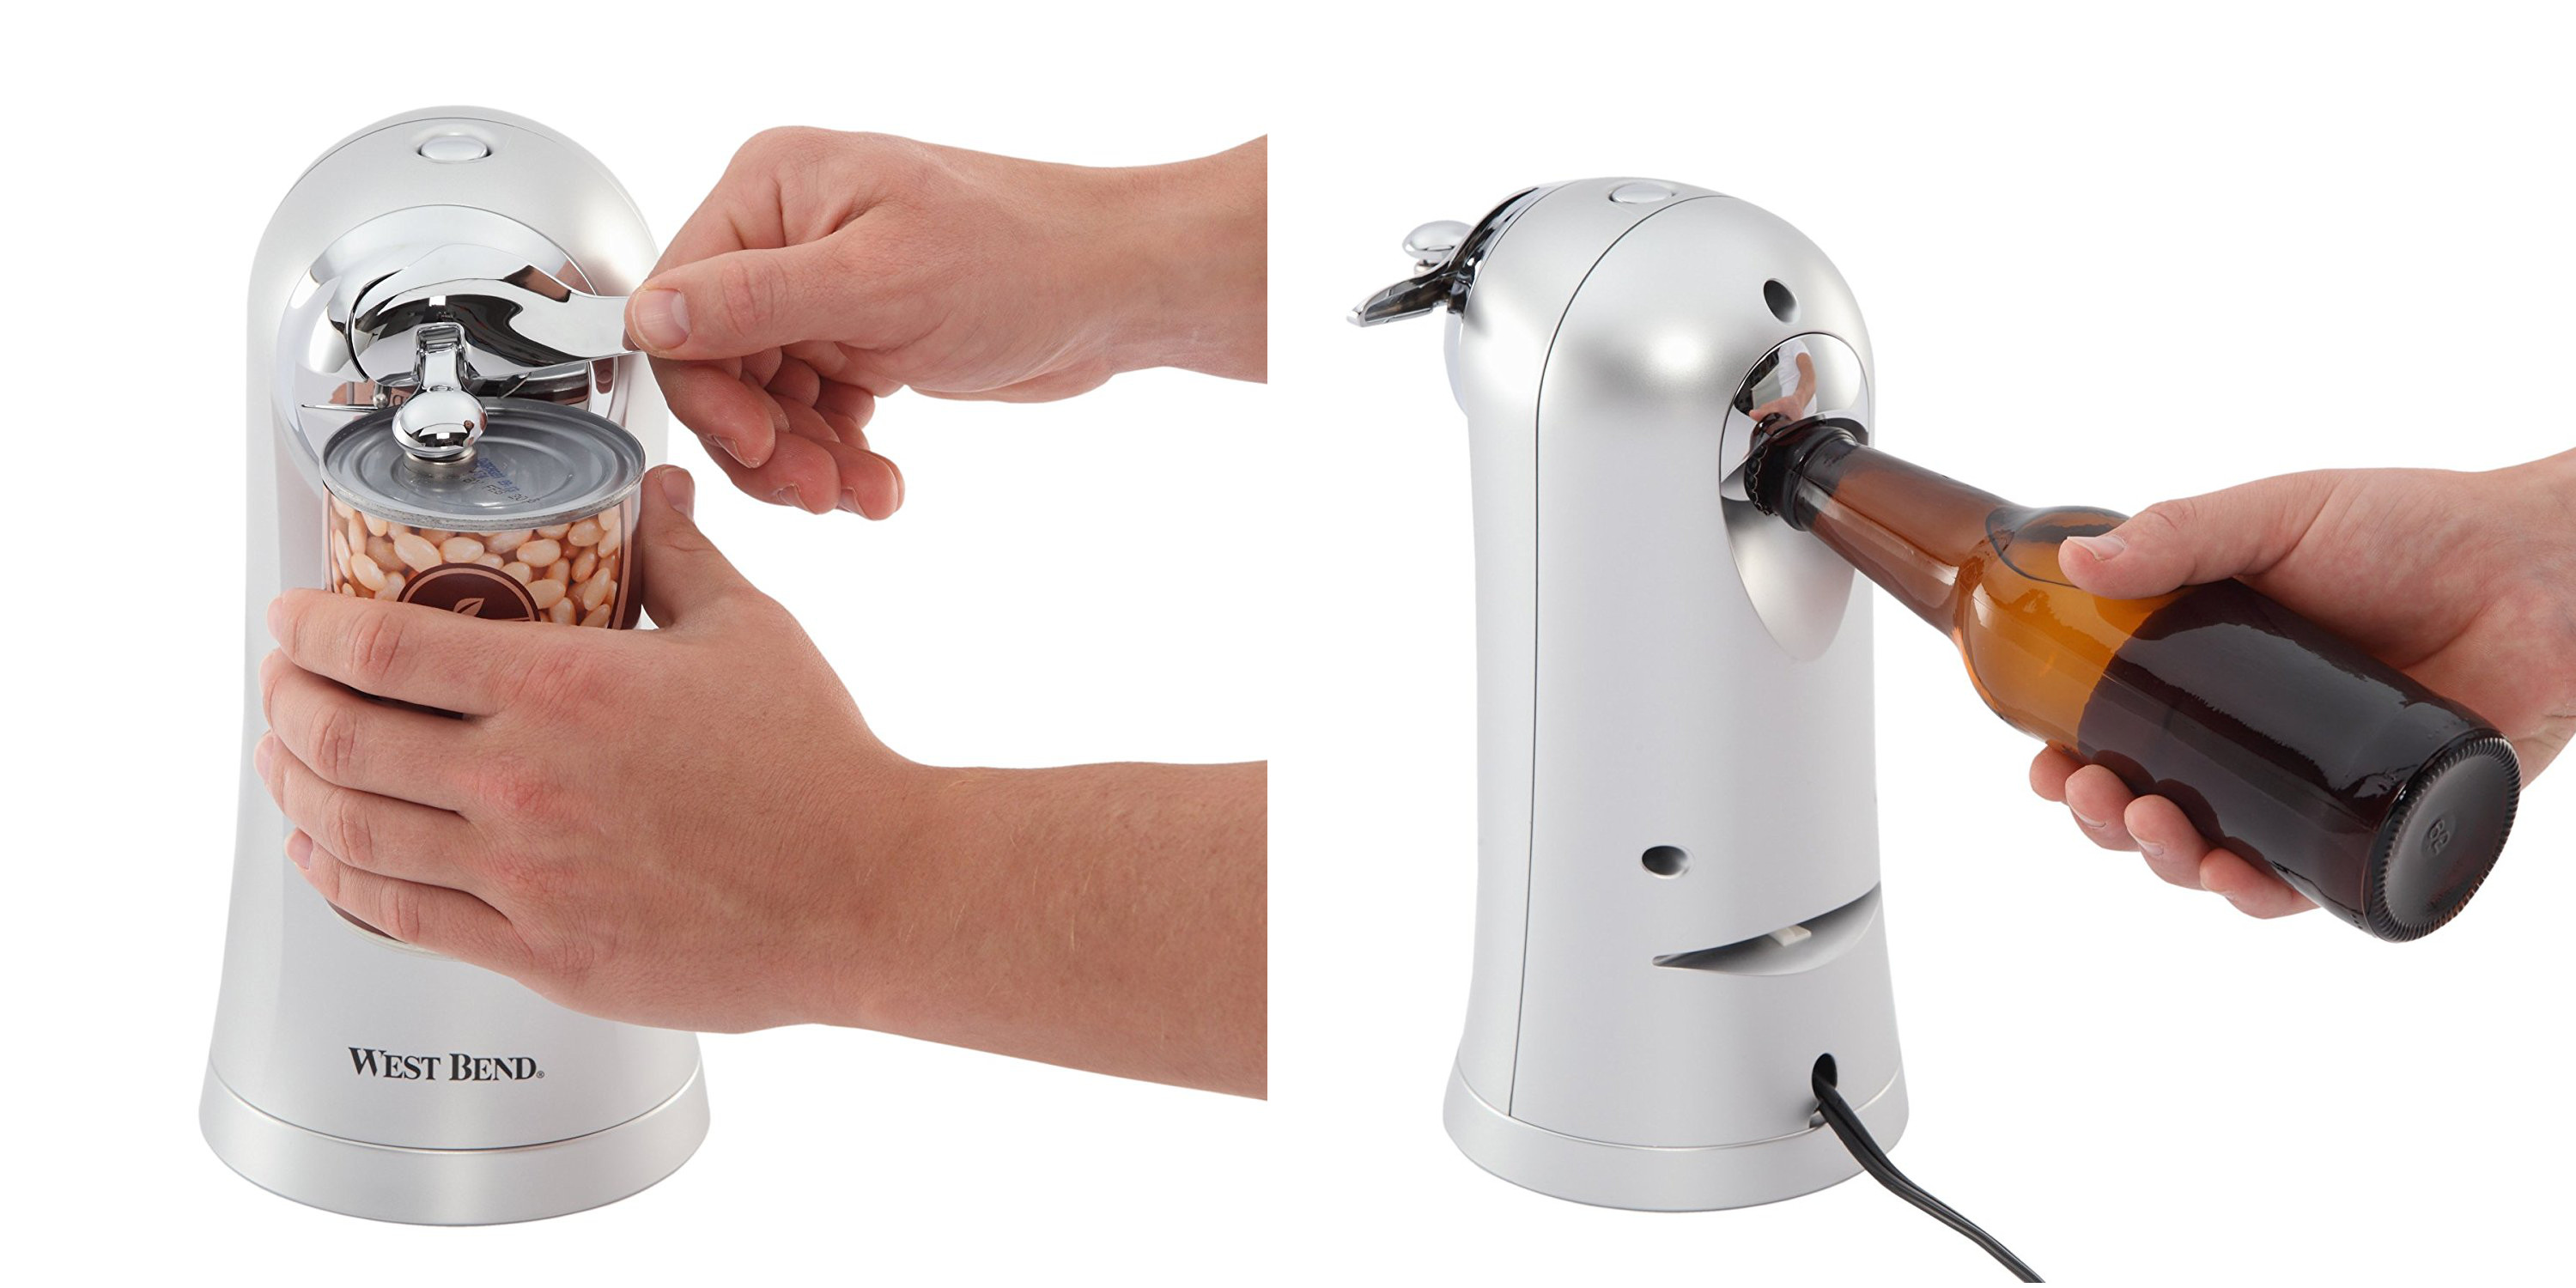 This West Bend Electric Can Opener can sharpen knives and open